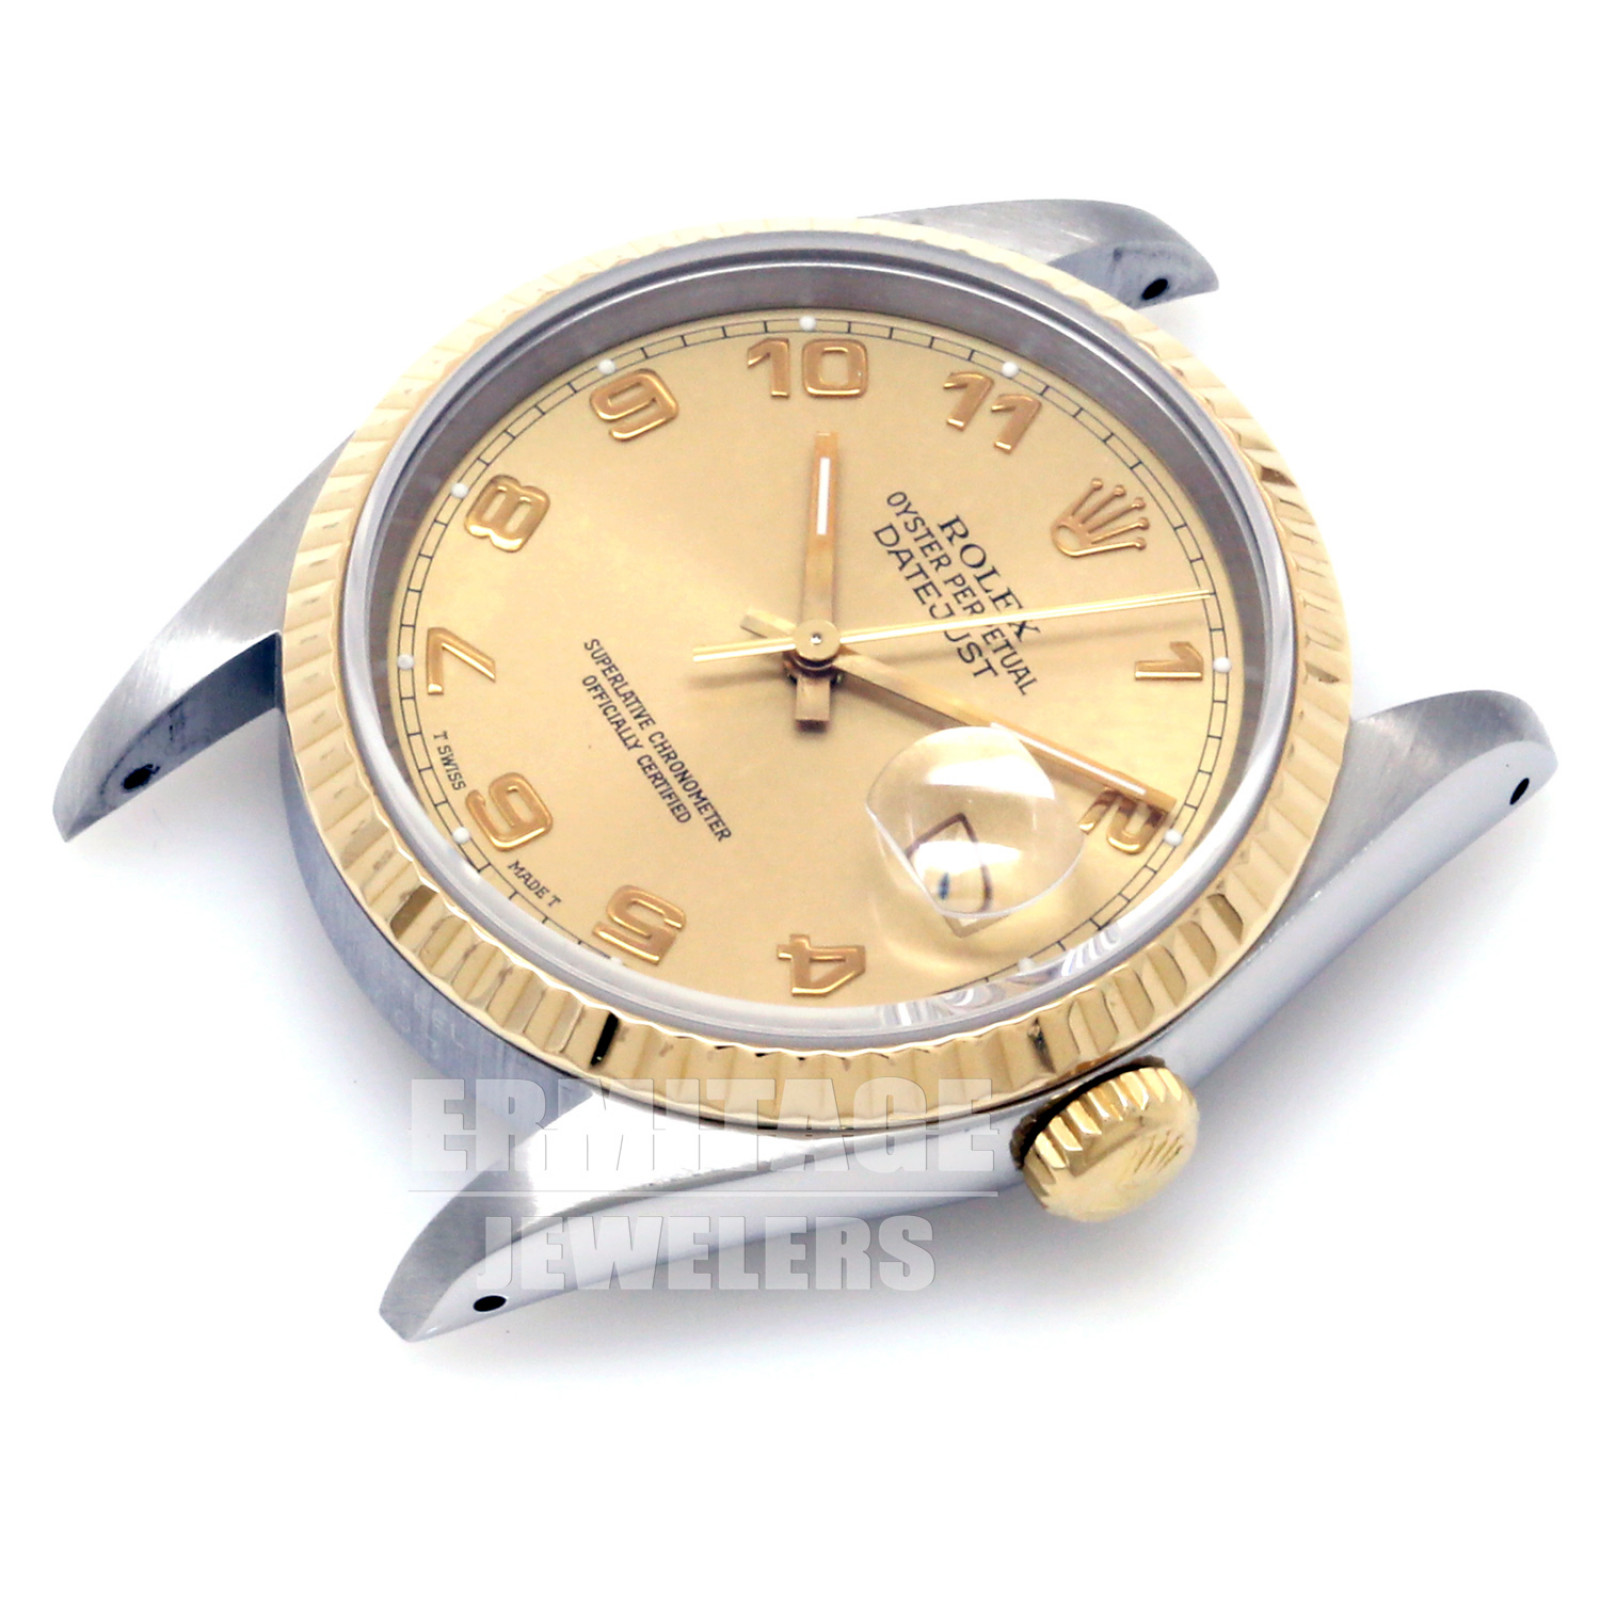 Mens Rolex Datejust 16233 with Champagne Dial